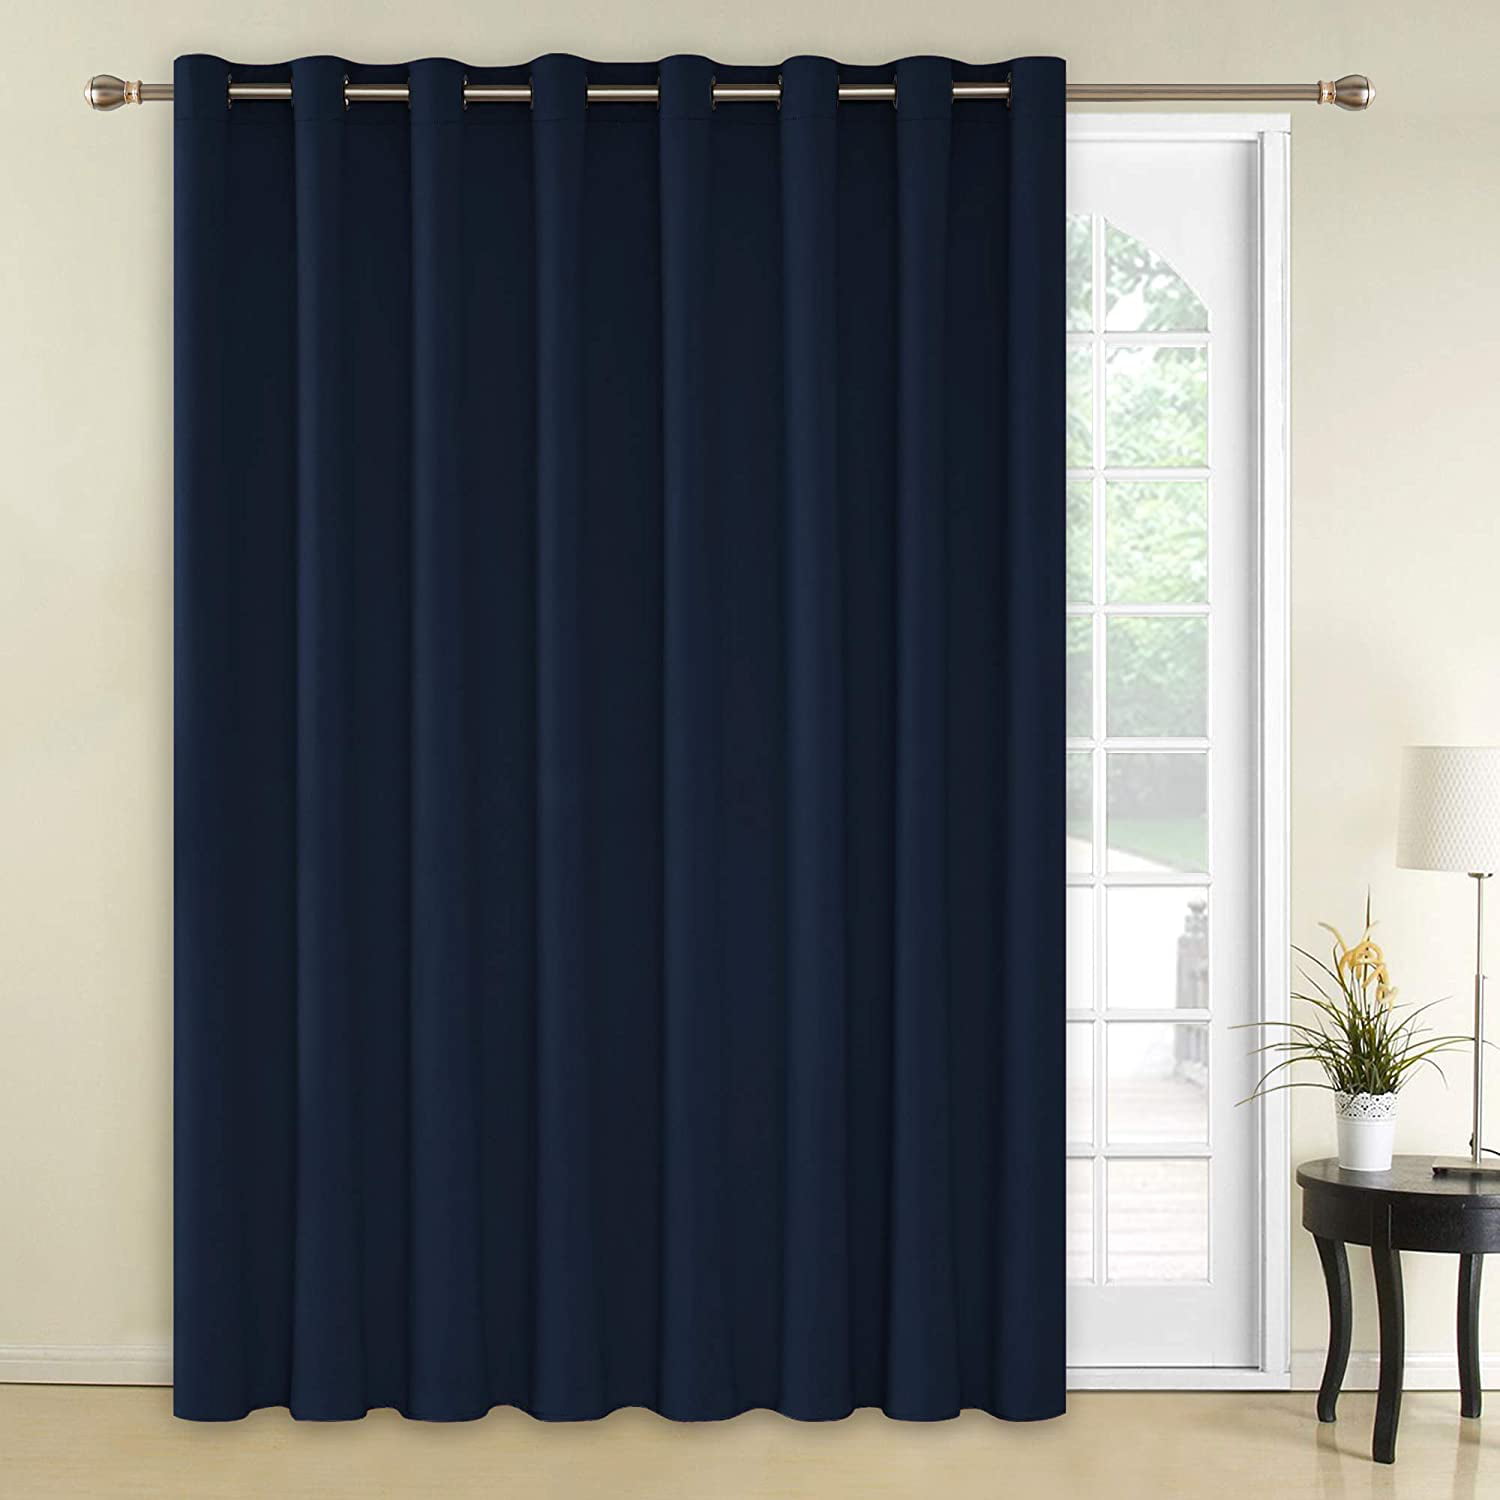 Sliding Door Curtains 80 Inches Wide, 80 Inch Curtains